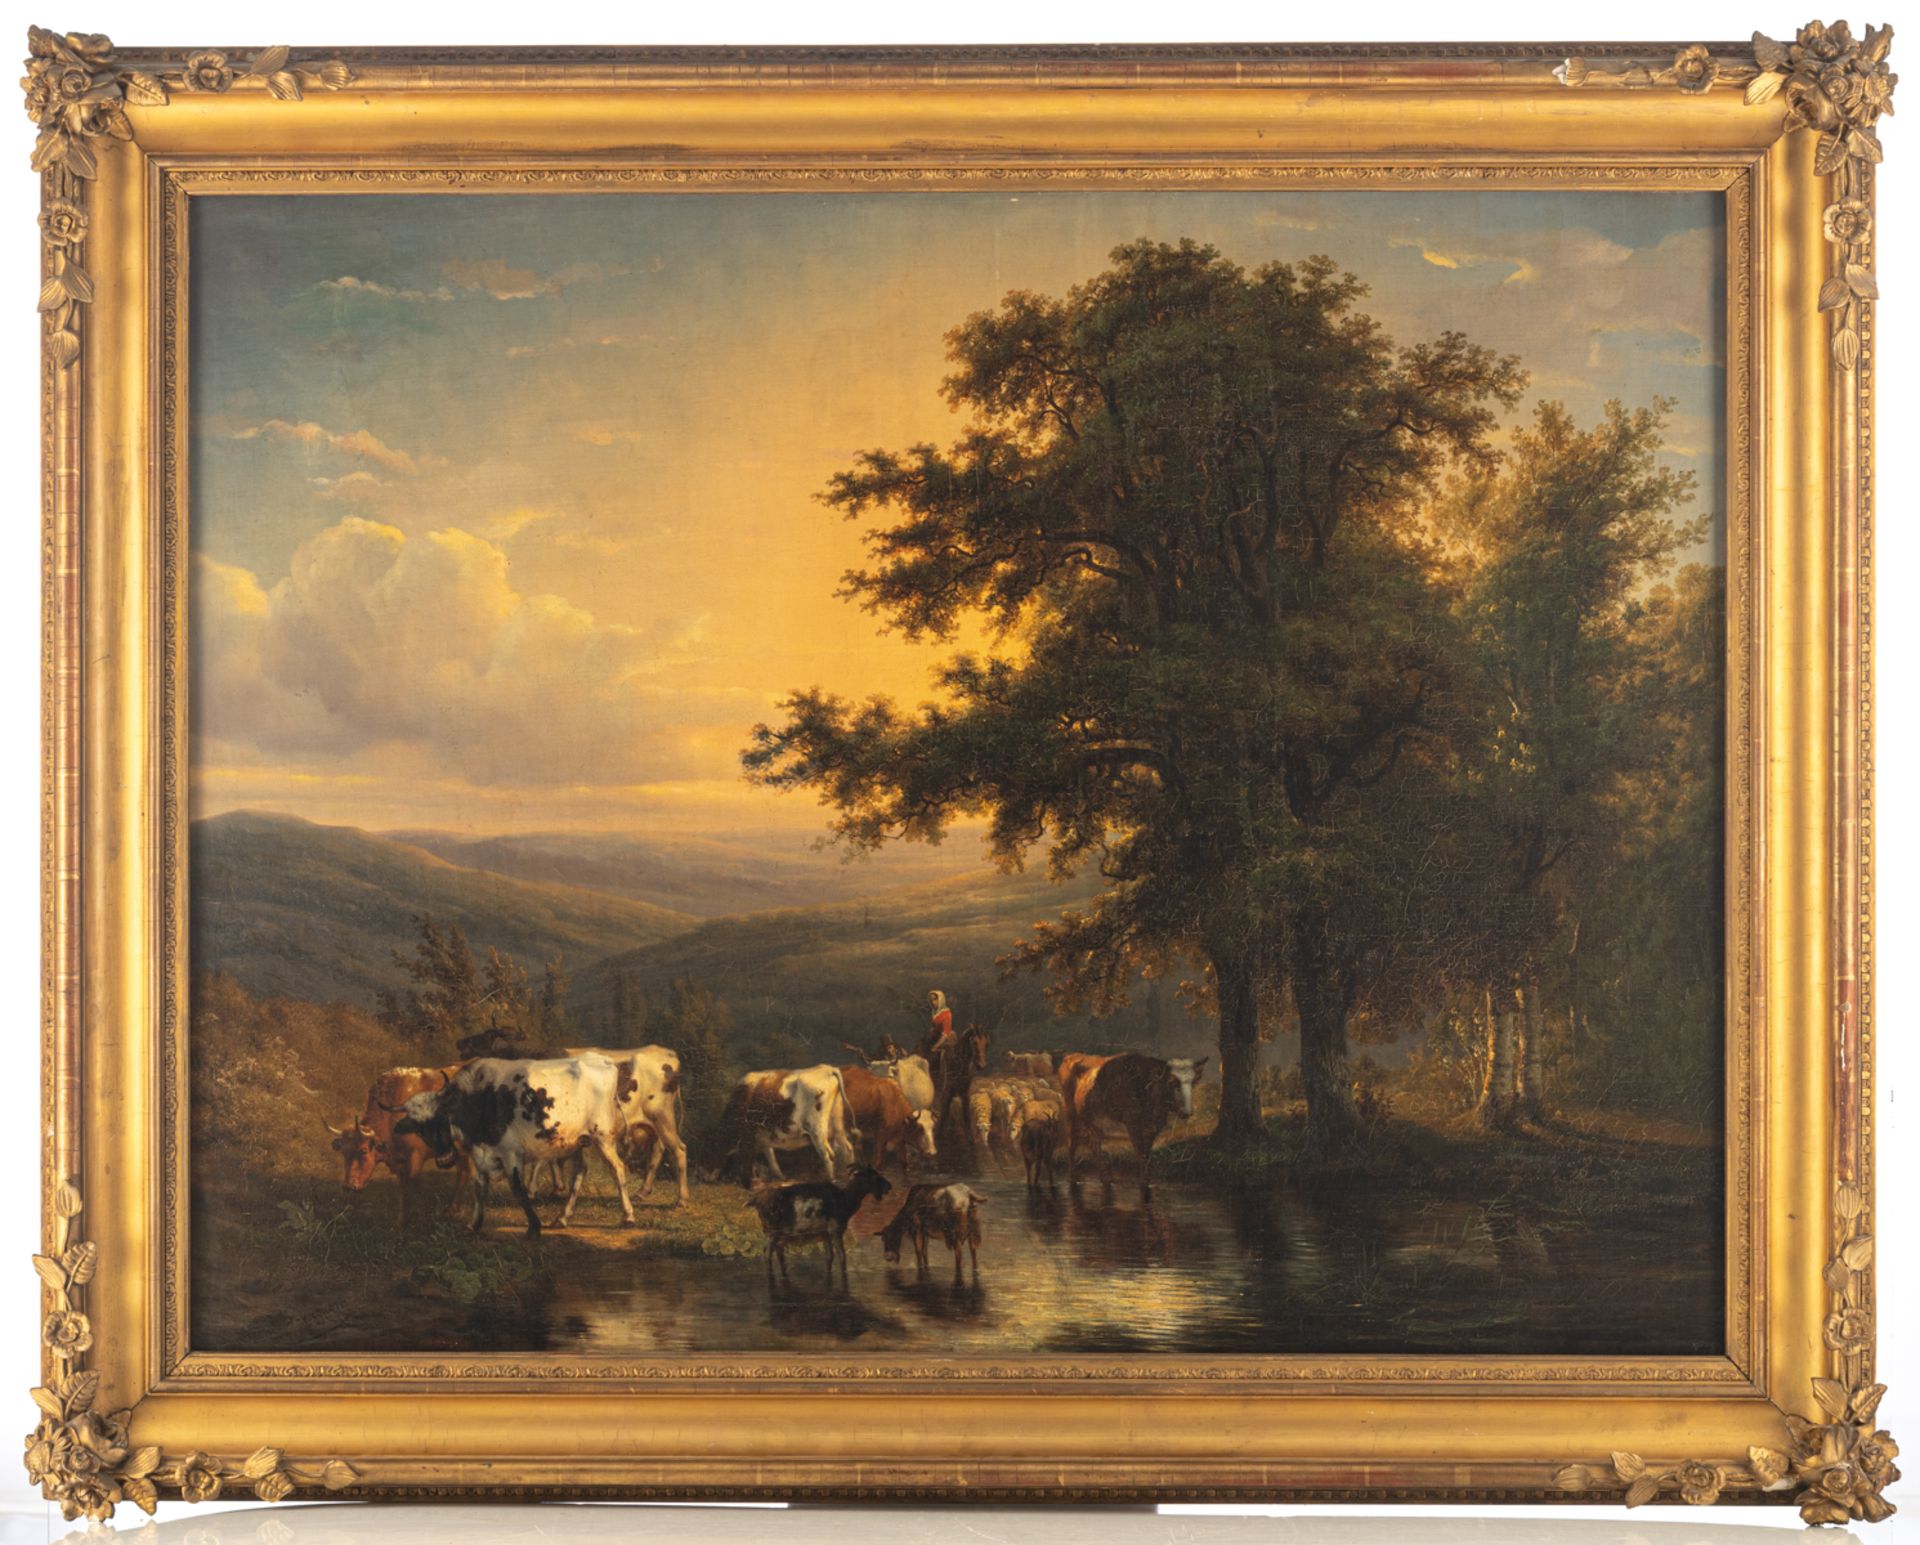 Stocquart I., shepherds and their cattle near the pond, with inscription 'Antwerpen' and dated 1849, - Bild 2 aus 4